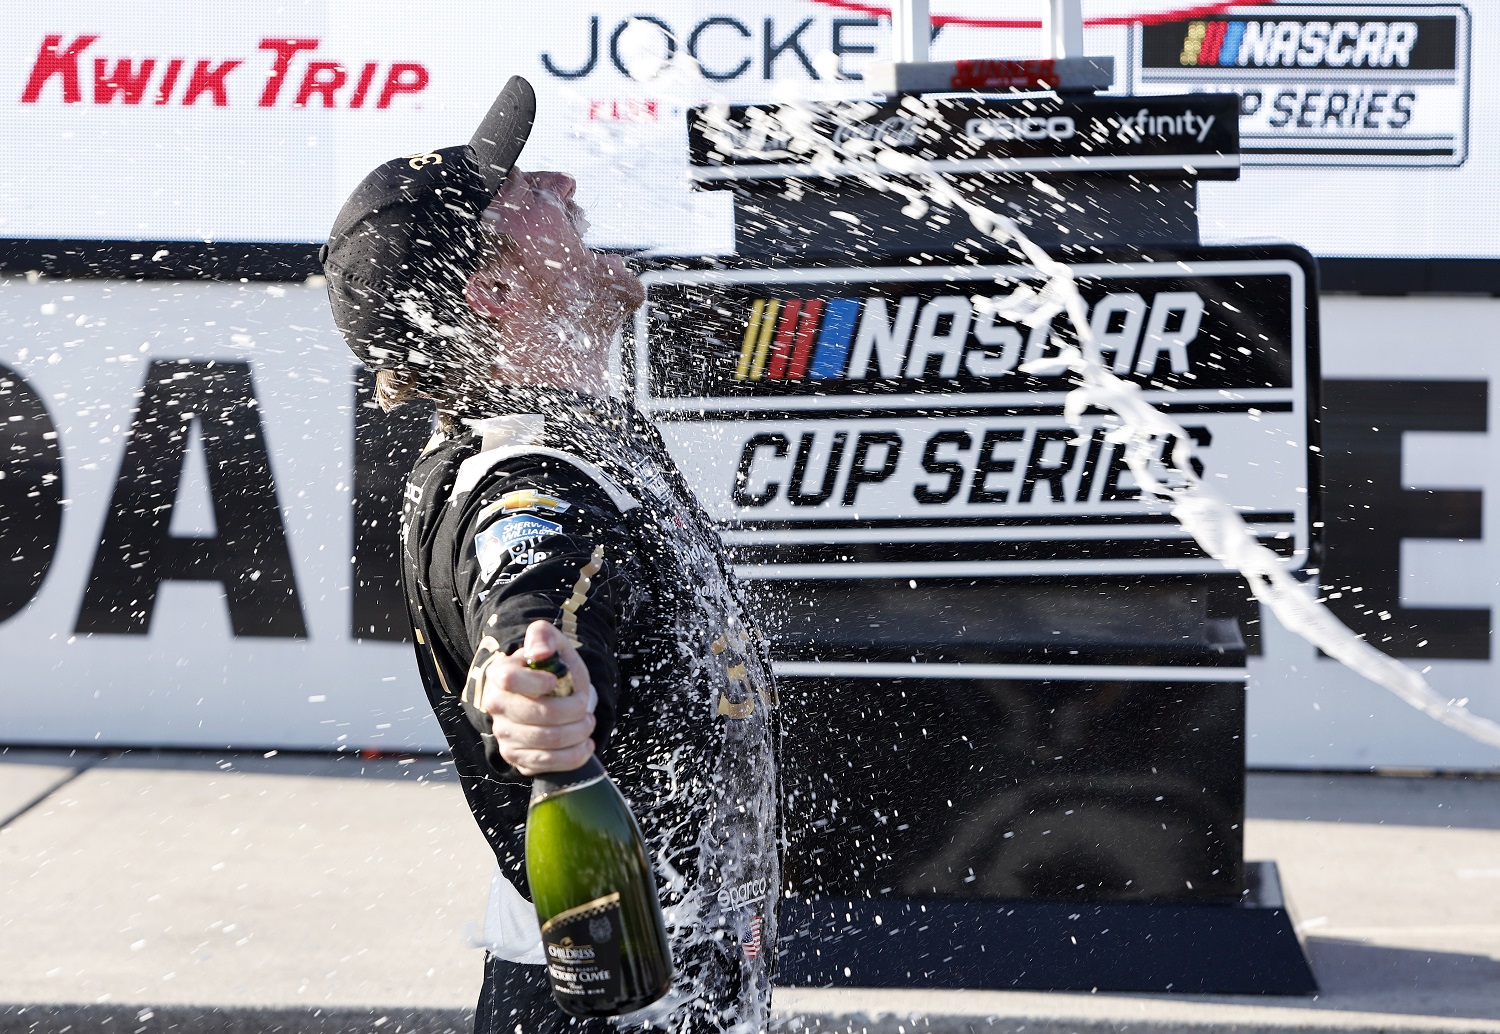 Tyler Reddick and crew celebrate by spraying champagne in Victory Lane after winning the NASCAR Cup Series Kwik Trip 250 at Road America on July 3, 2022. | Sean Gardner/Getty Images